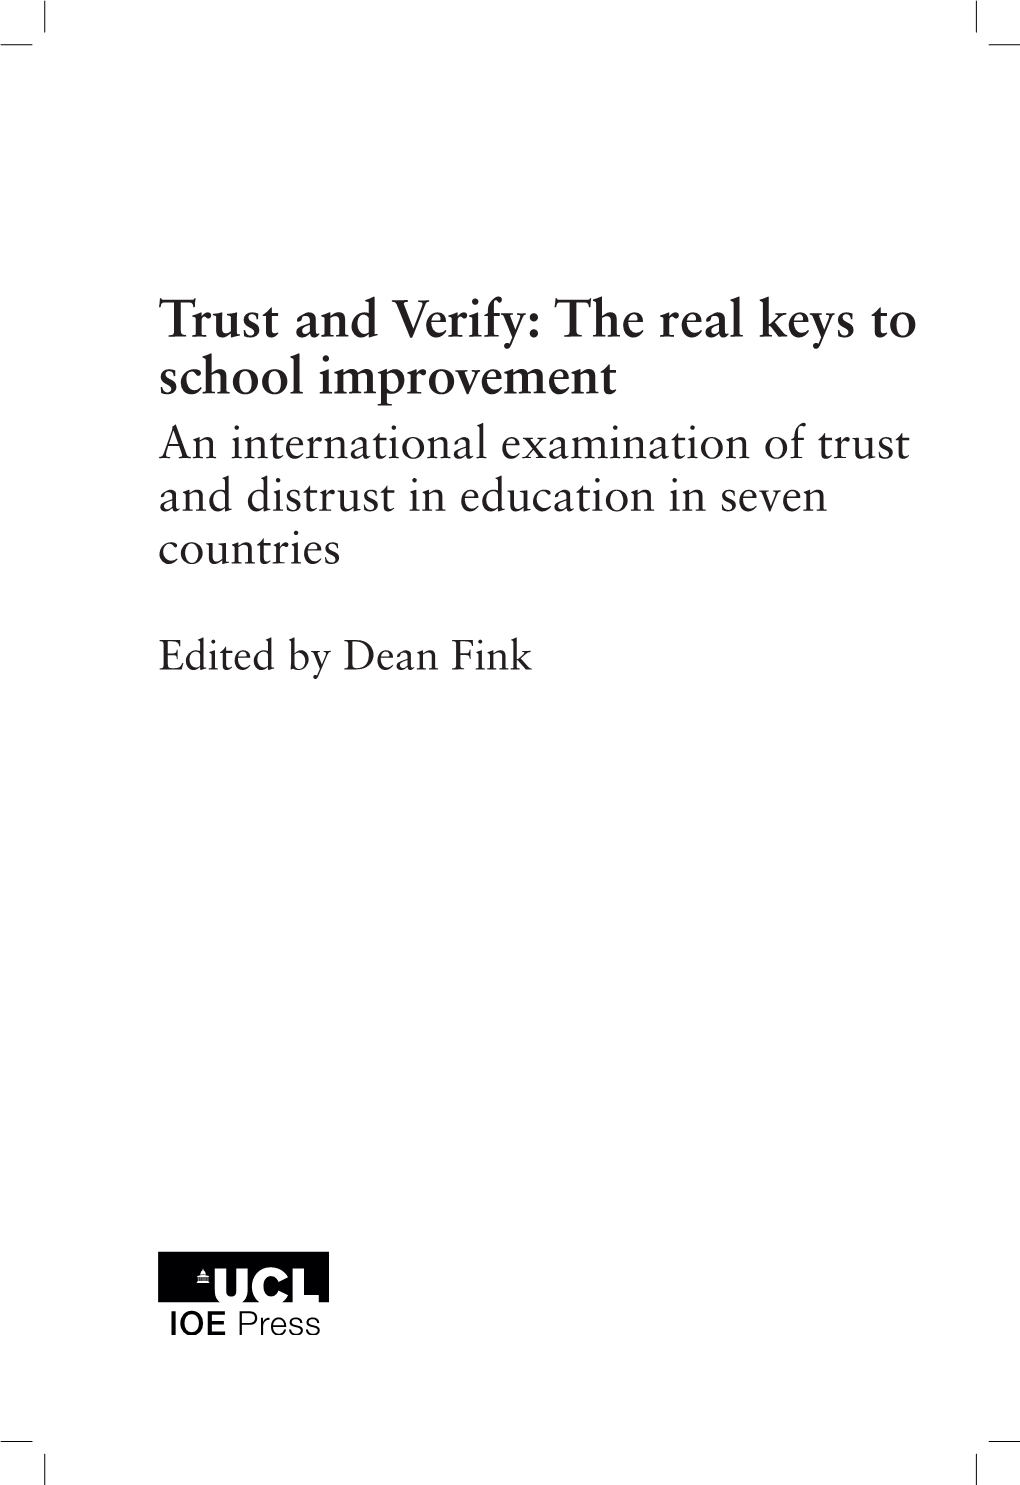 Trust and Verify: the Real Keys to School Improvement an International Examination of Trust and Distrust in Education in Seven Countries